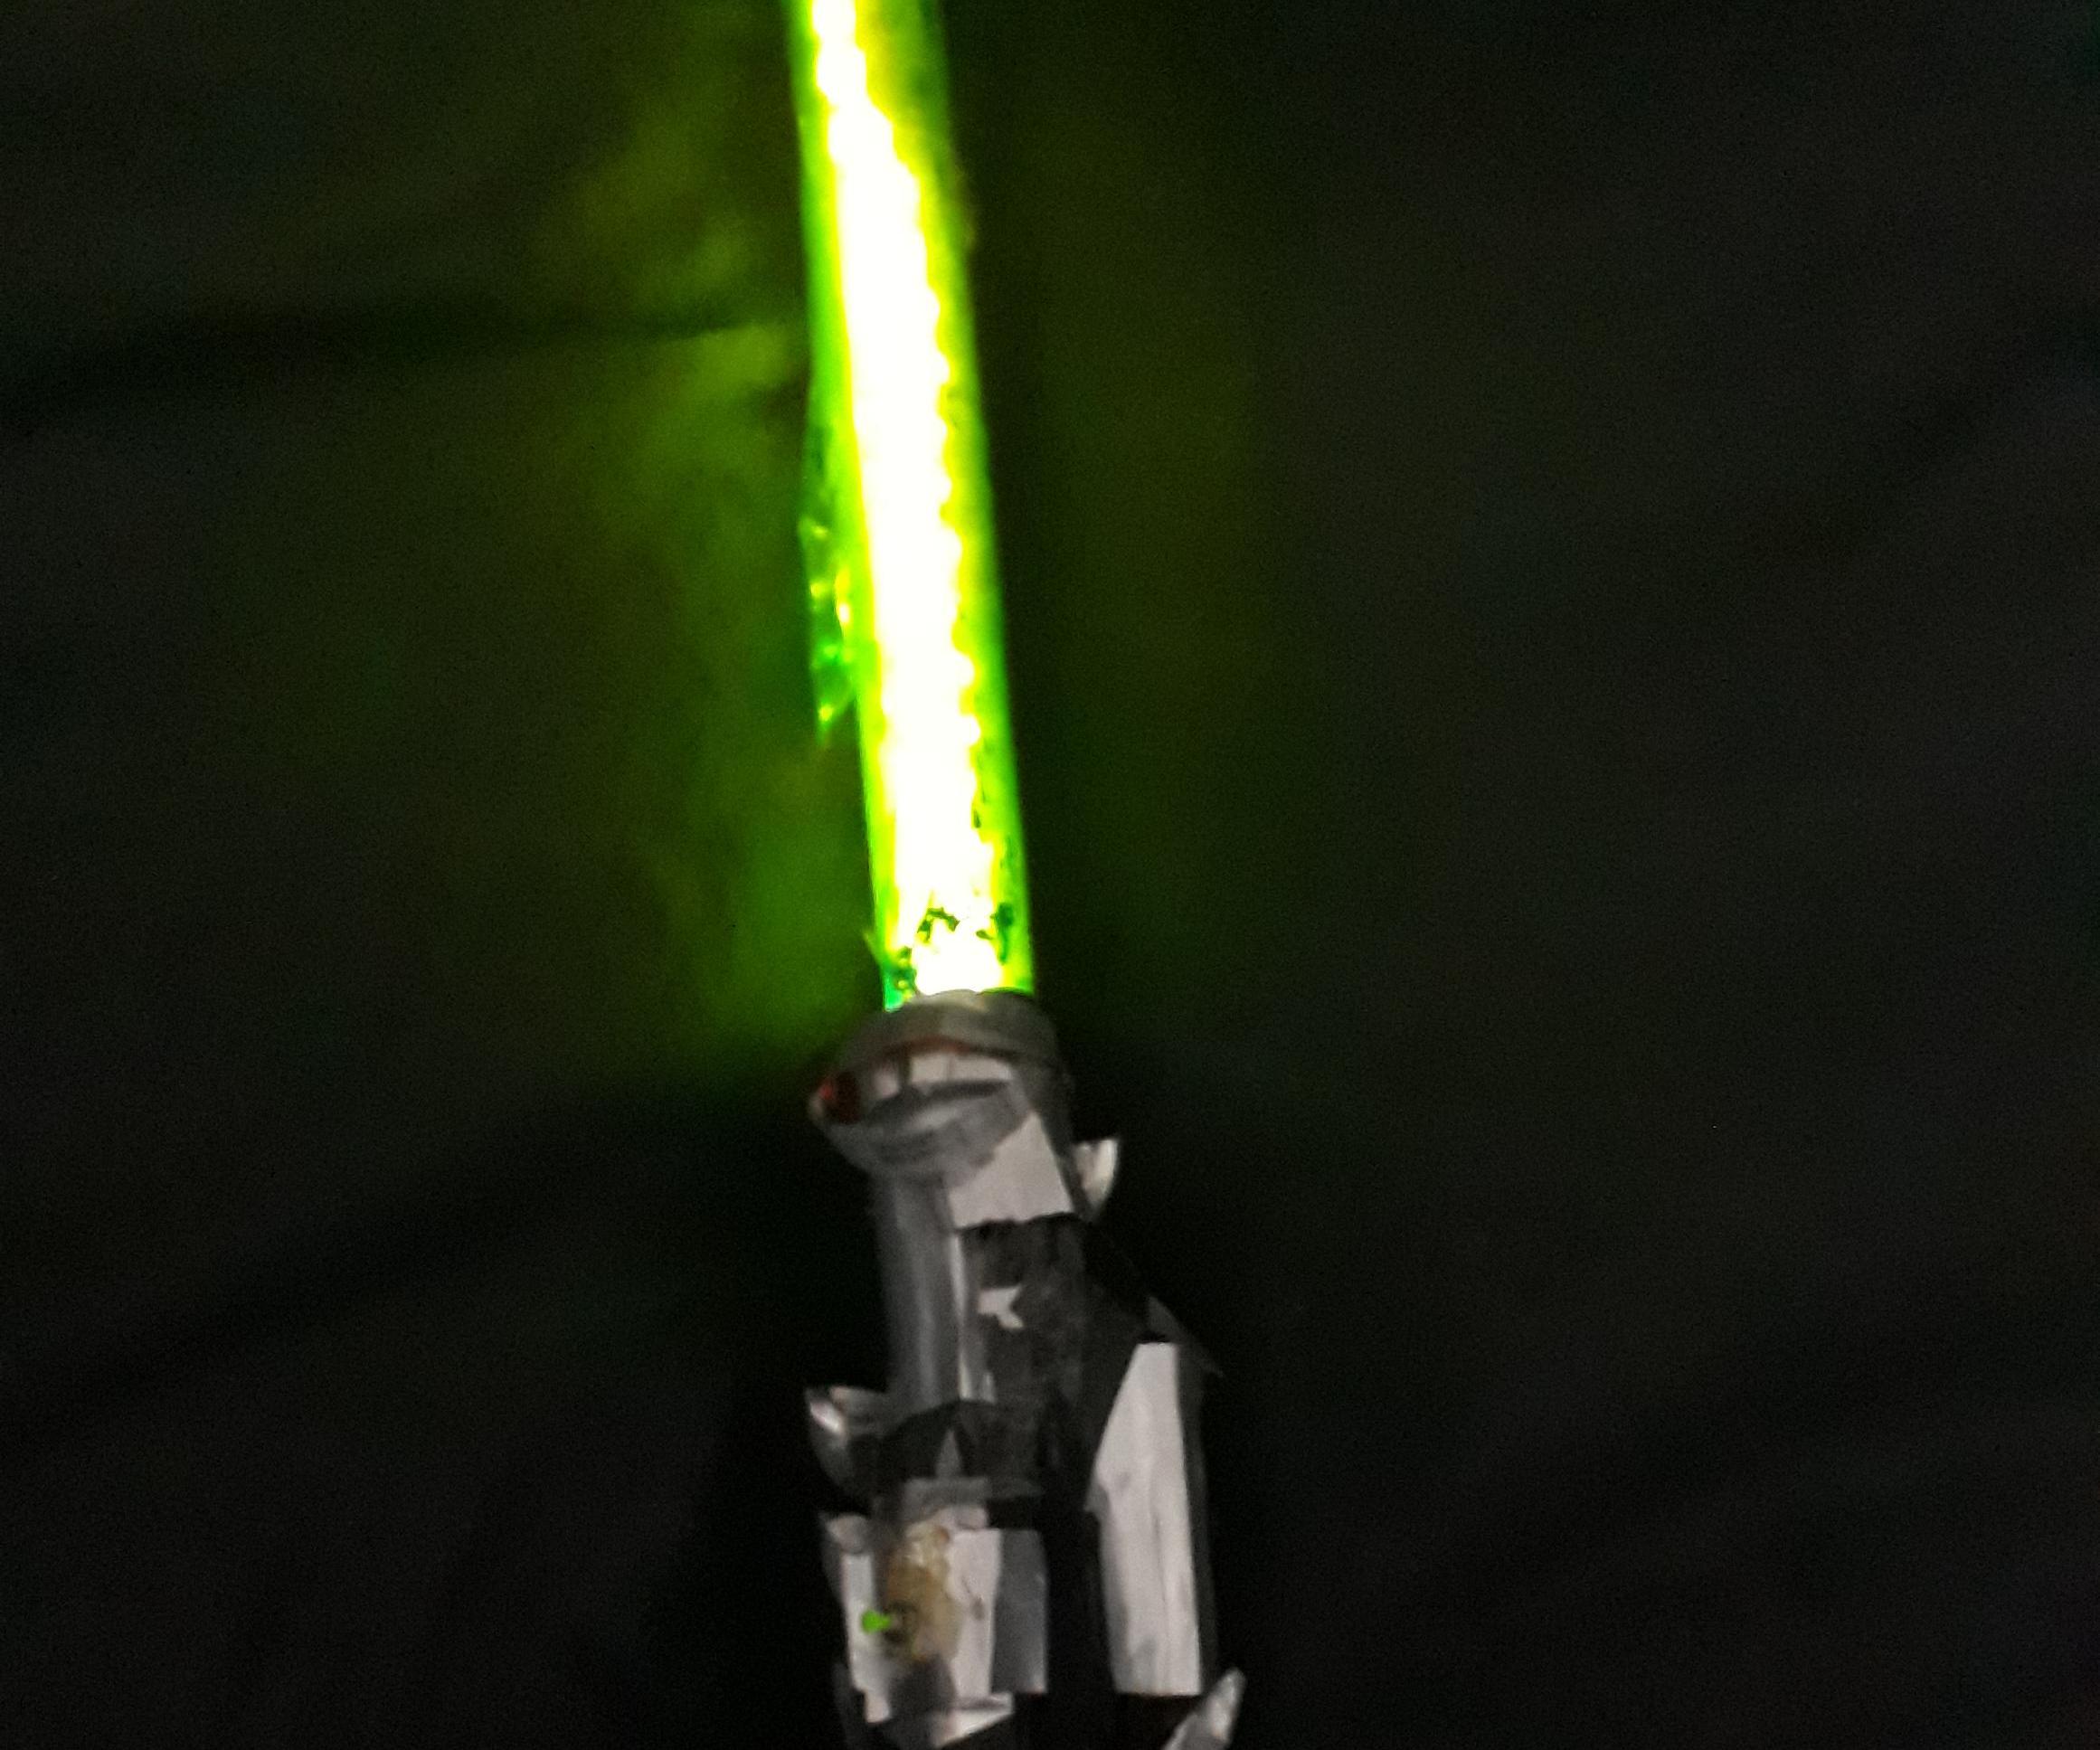 Motion Sensing Lightsaber Game Controller With Some Scrap